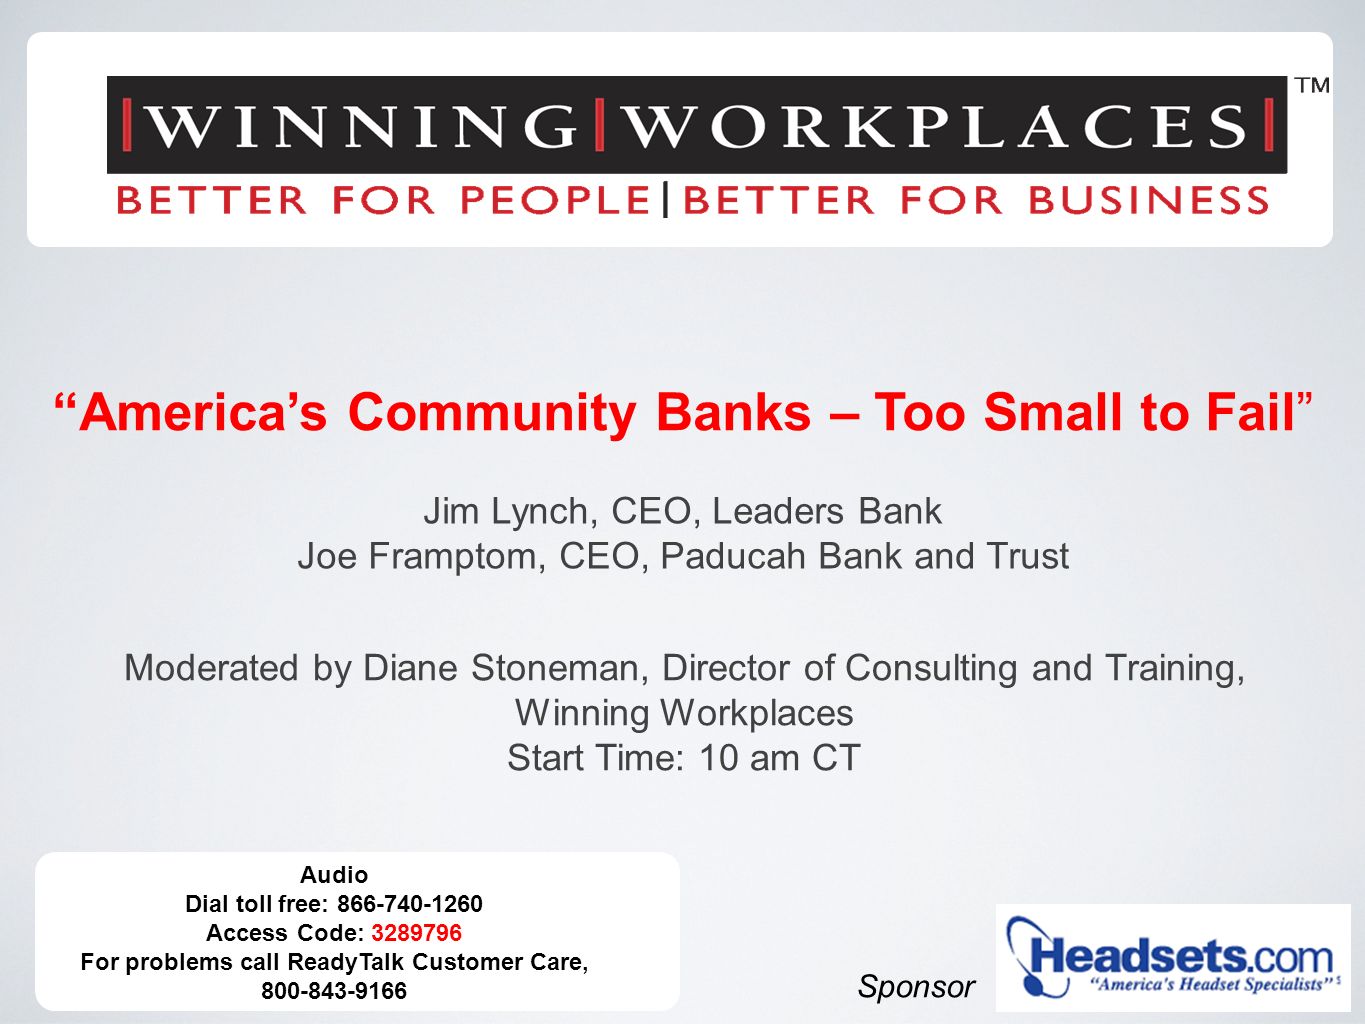 Audio Dial toll free: Access Code: For problems call ReadyTalk Customer Care, Sponsor America’s Community Banks – Too Small to Fail Jim Lynch, CEO, Leaders Bank Joe Framptom, CEO, Paducah Bank and Trust Moderated by Diane Stoneman, Director of Consulting and Training, Winning Workplaces Start Time: 10 am CT